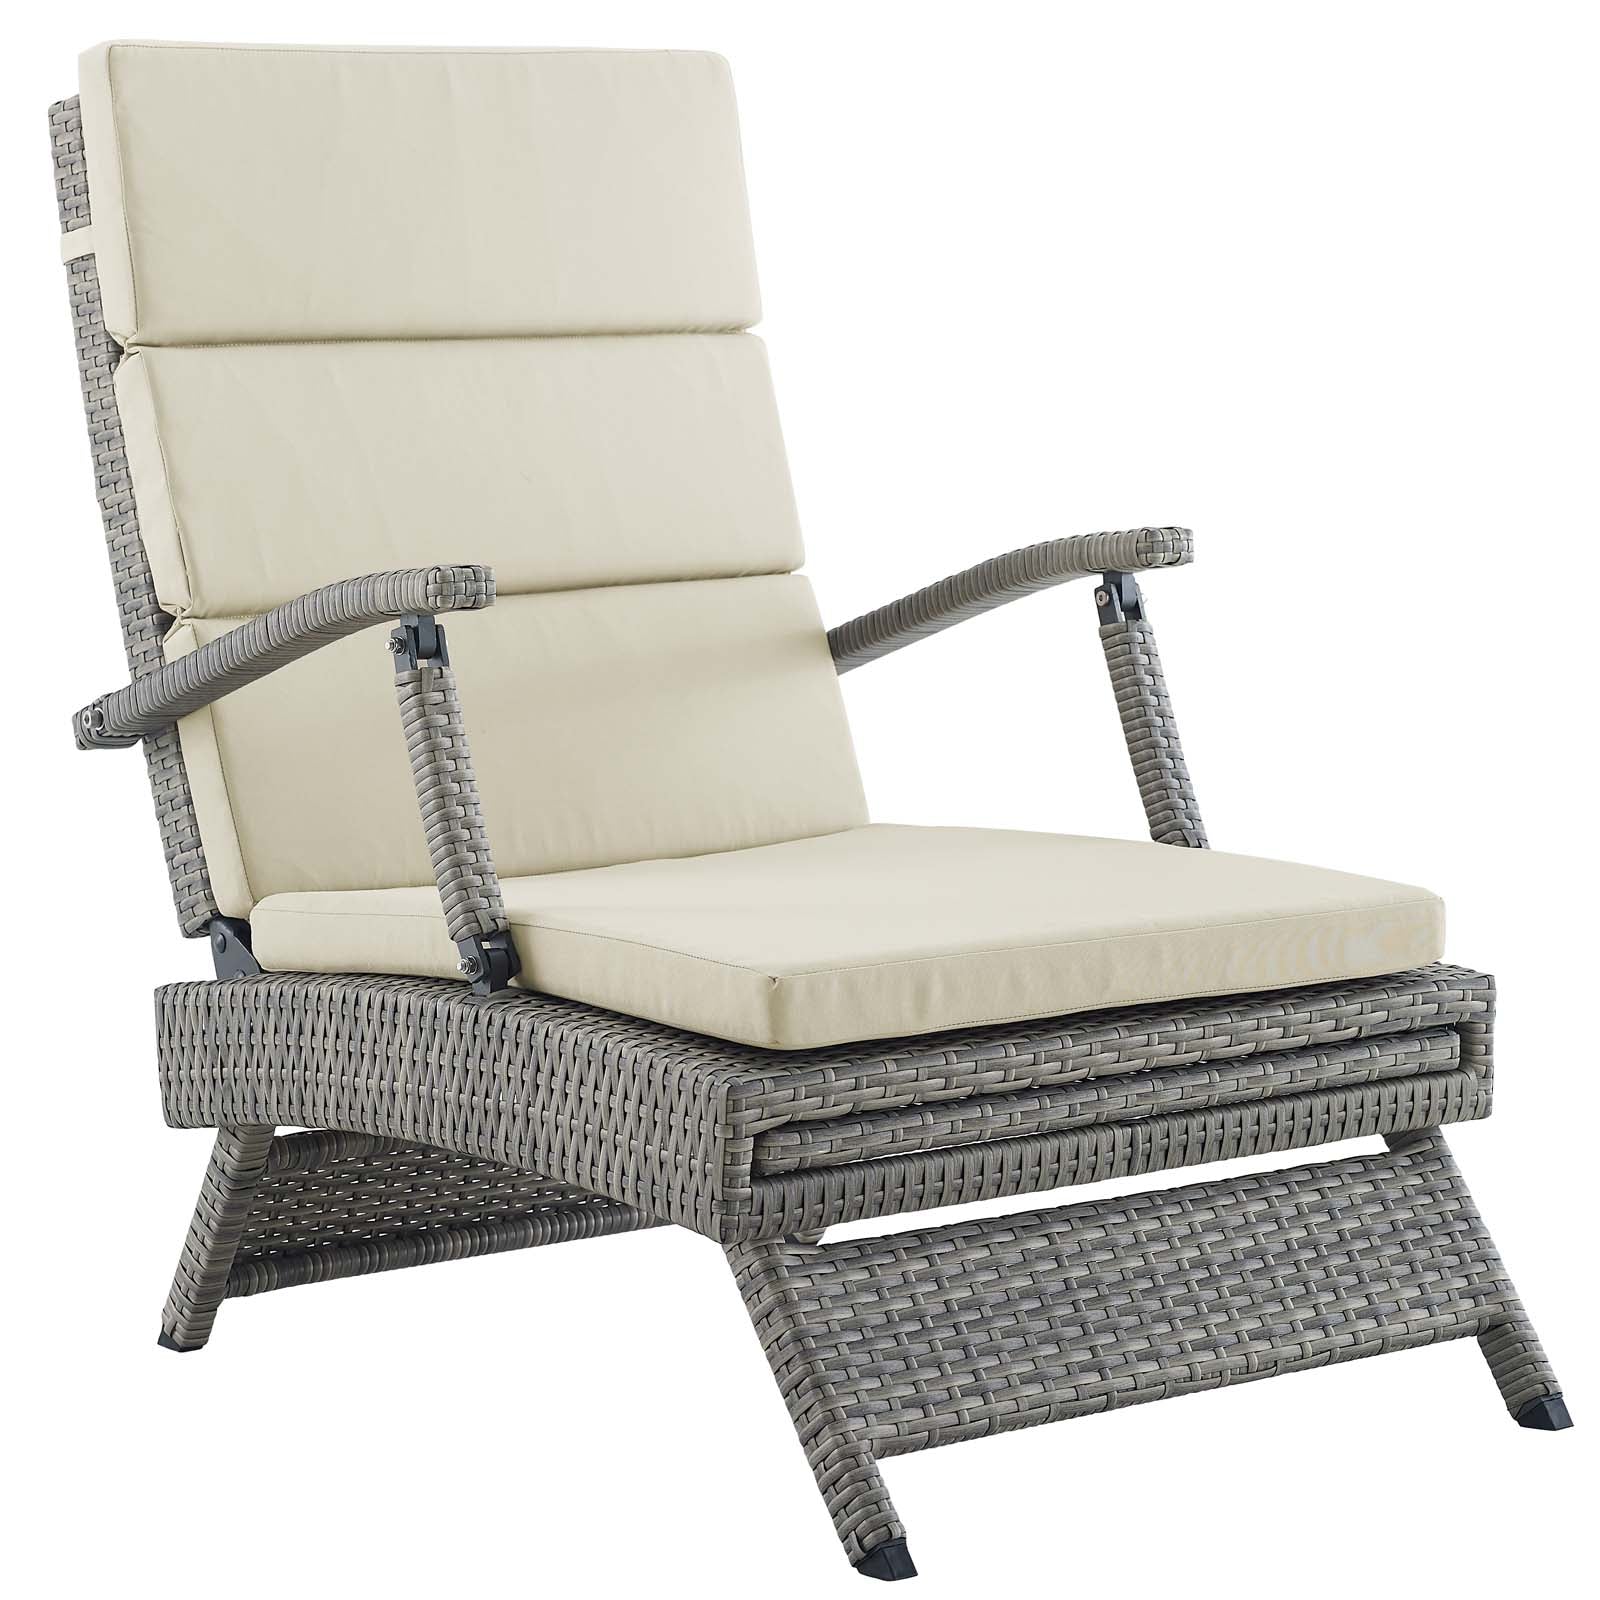 Modway Outdoor Loungers - Envisage Chaise Outdoor Patio Wicker Rattan Lounge Chair Light Gray Beige